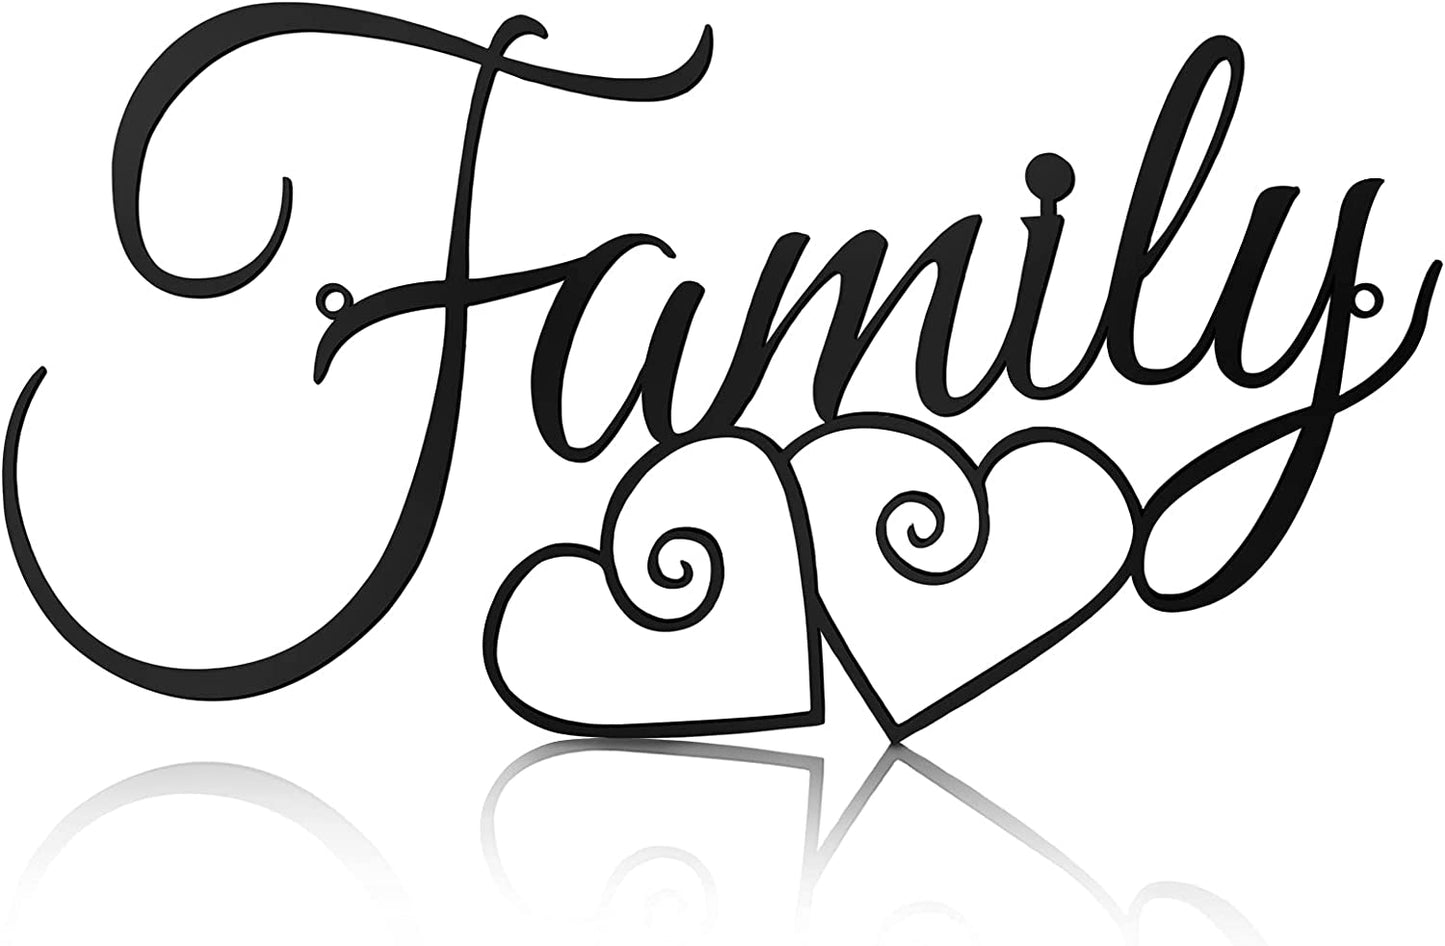 Family Wall Sign Family Wall Decor Sign Family Word Wall Art Family Wall Hanging Decoration for Home Dining Room Kitchen Door Decorations Wall Decor (Black,Metal)